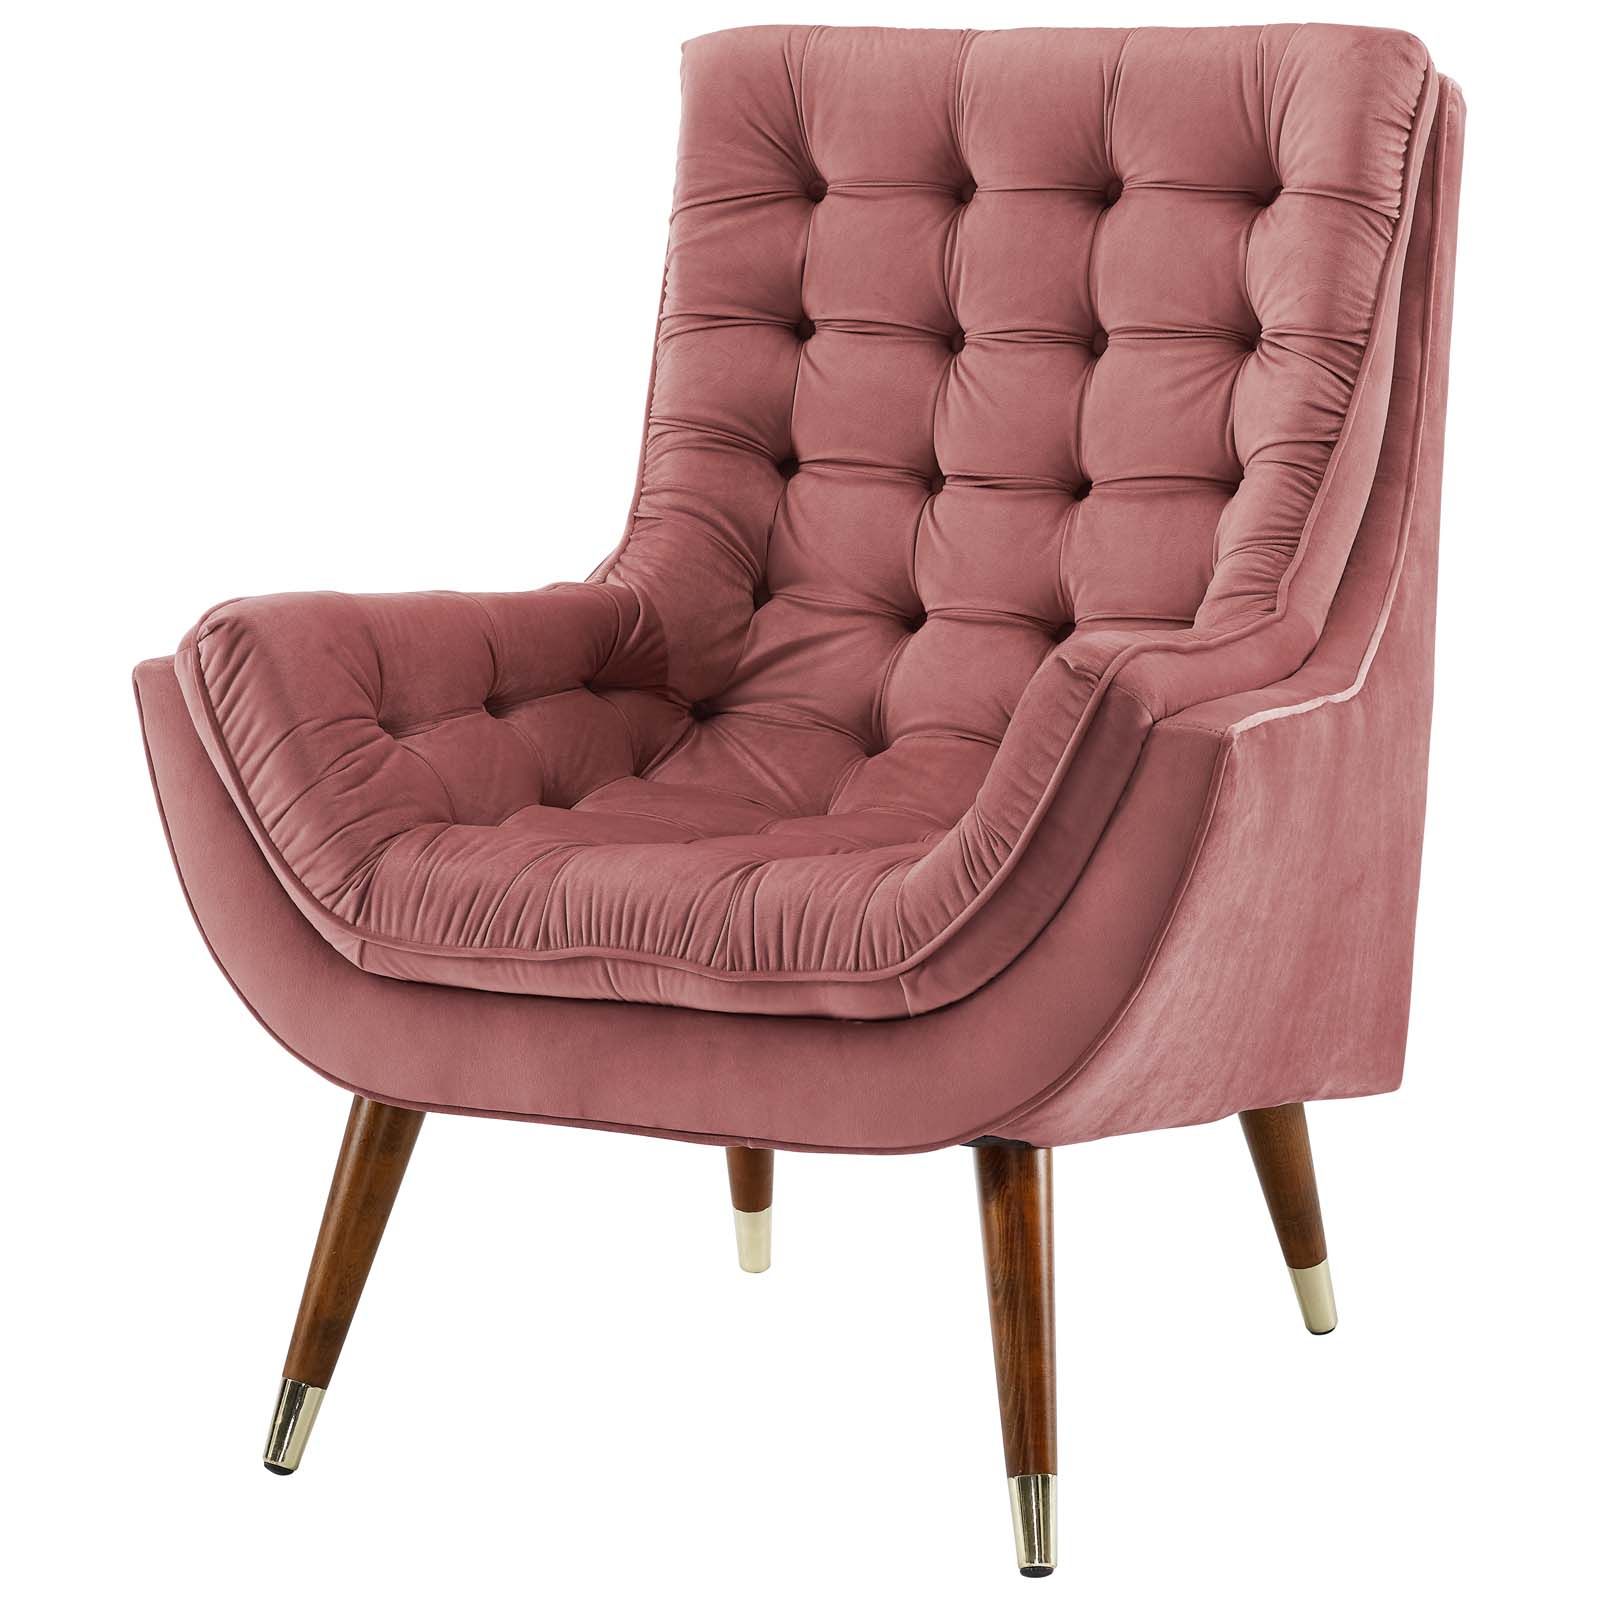 Details About Modern Living Room Lounge Lobby Tufted Accent Chair, Velvet,  Rose Red, 15487 Within Velvet Tufted Accent Chairs (View 20 of 20)